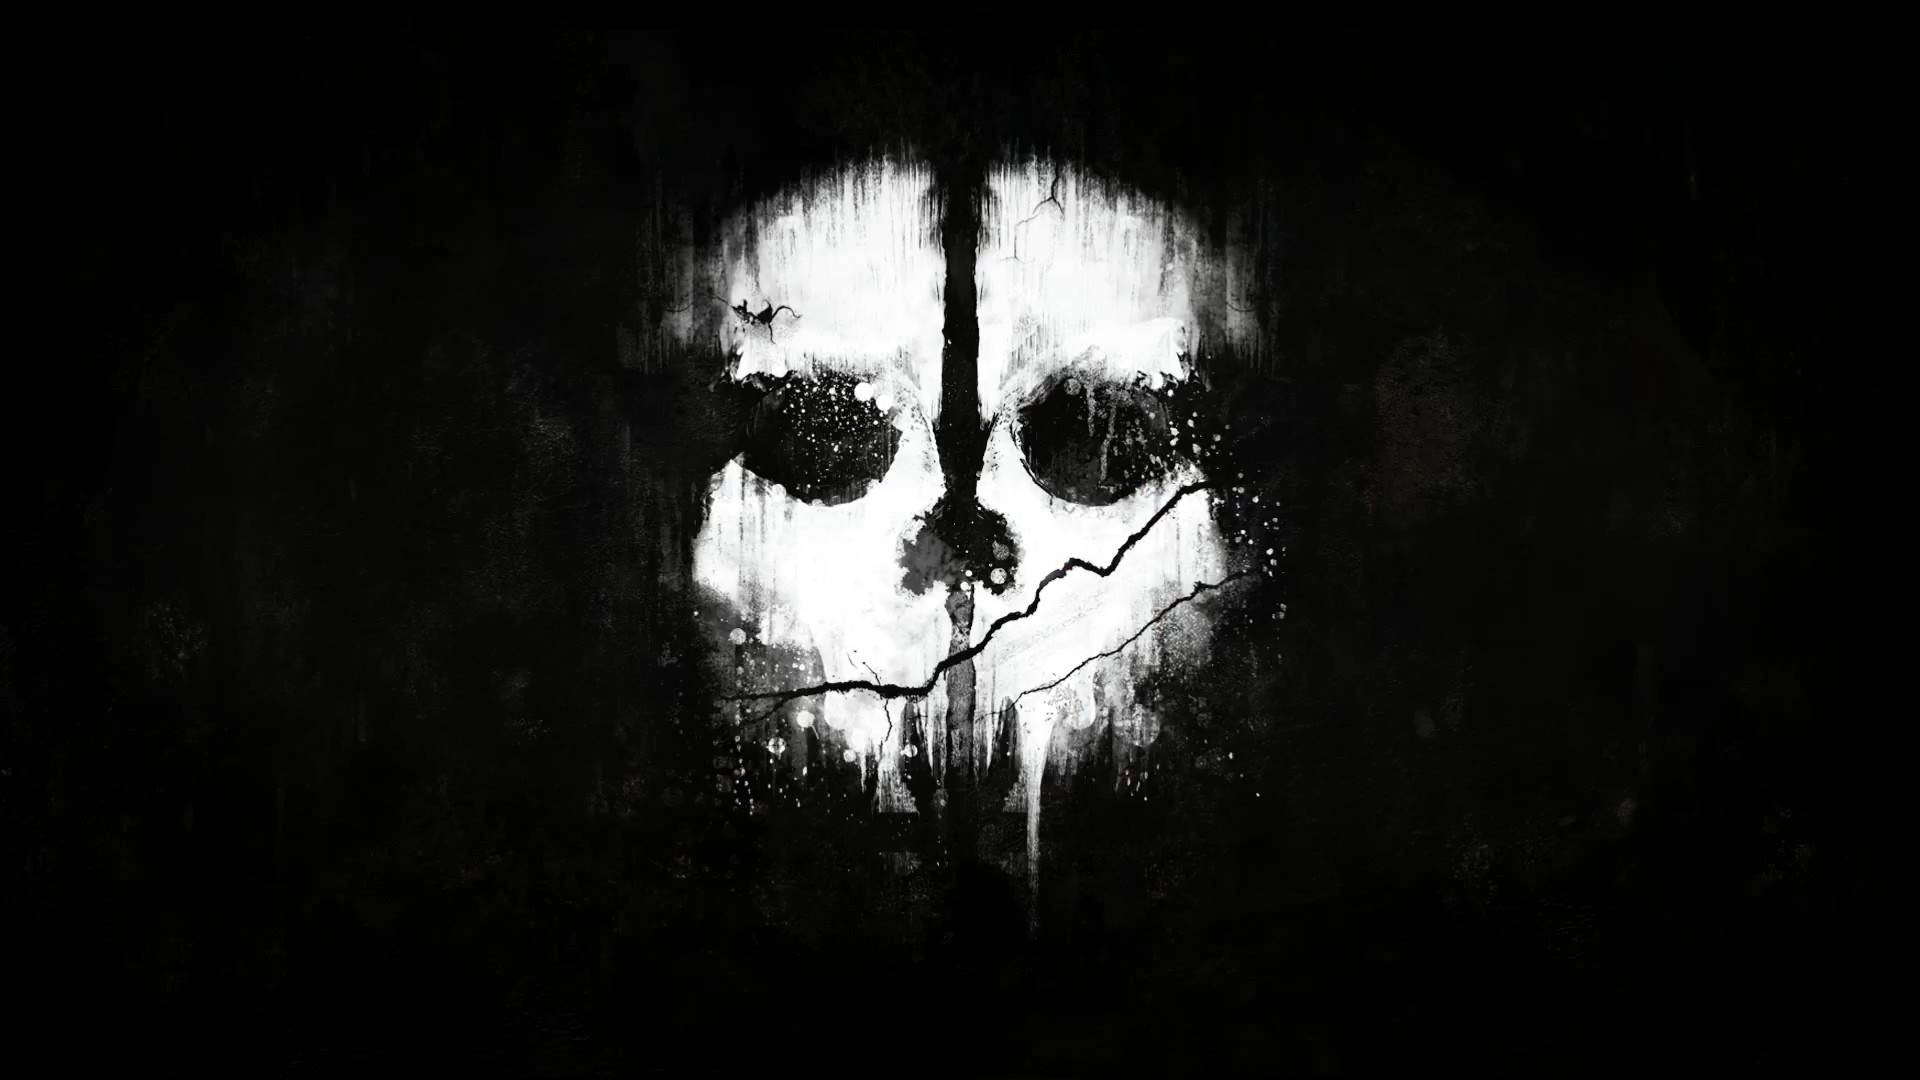 call of duty ghosts wallpaper in hd GamingBoltcom Video Game News 1920x1080